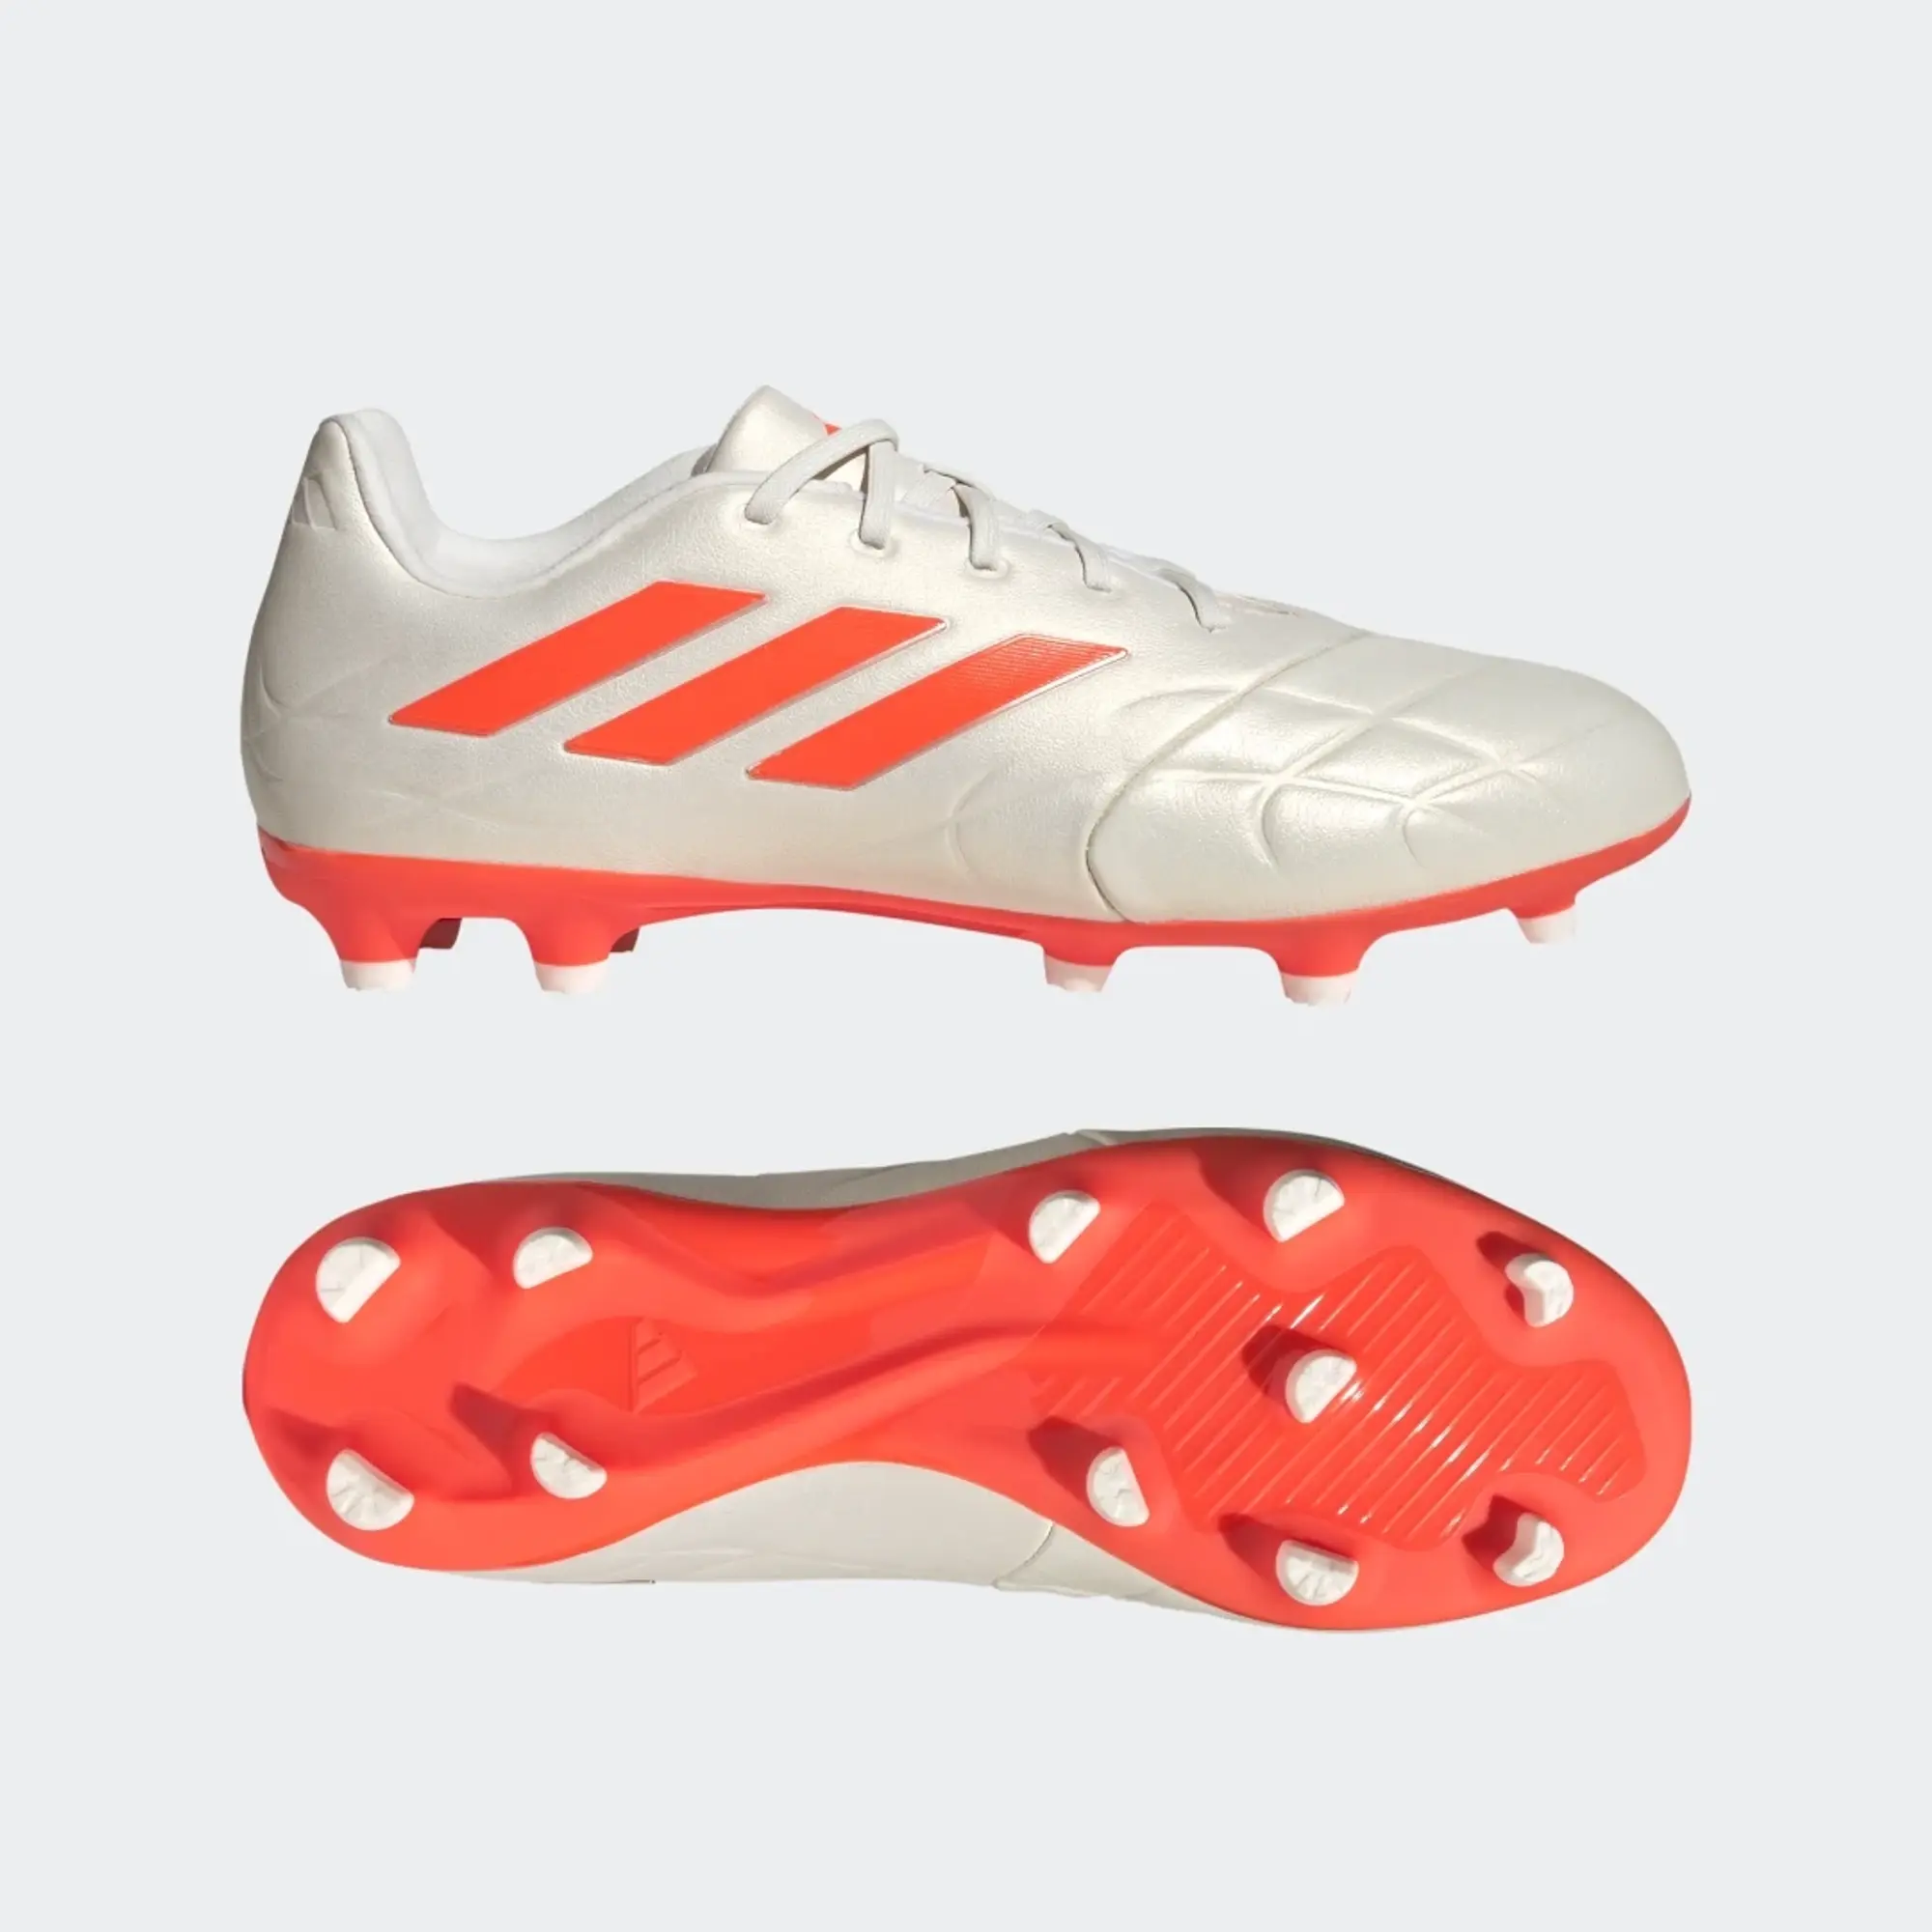 adidas Copa Pure.3 Firm Ground Boots